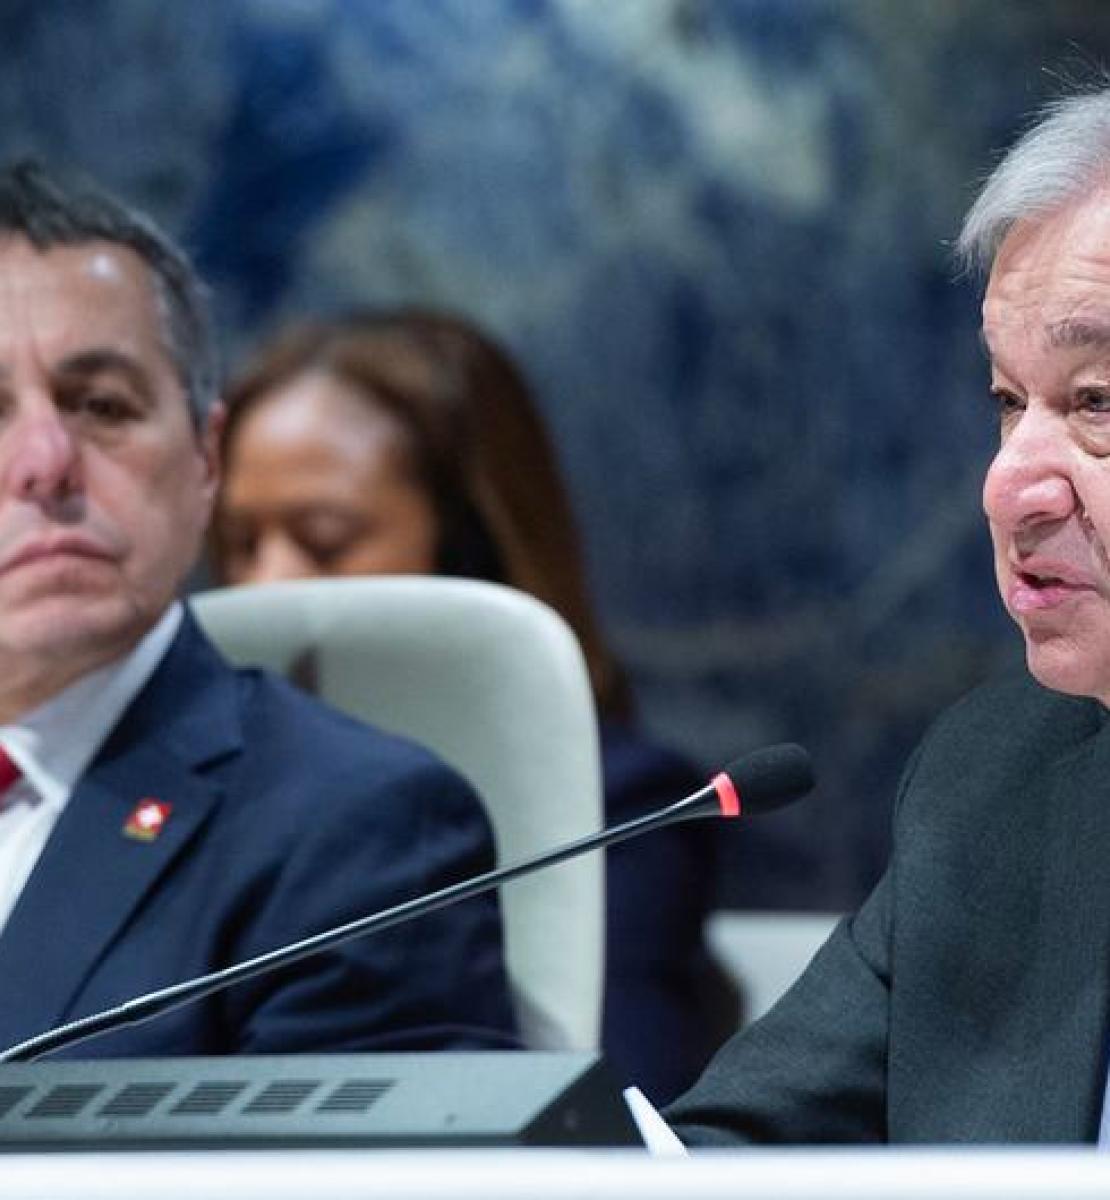 The UN Chief speaks into a microphone at a hearing on rebuilding in Pakistan, after flooding in the summer of 2022.